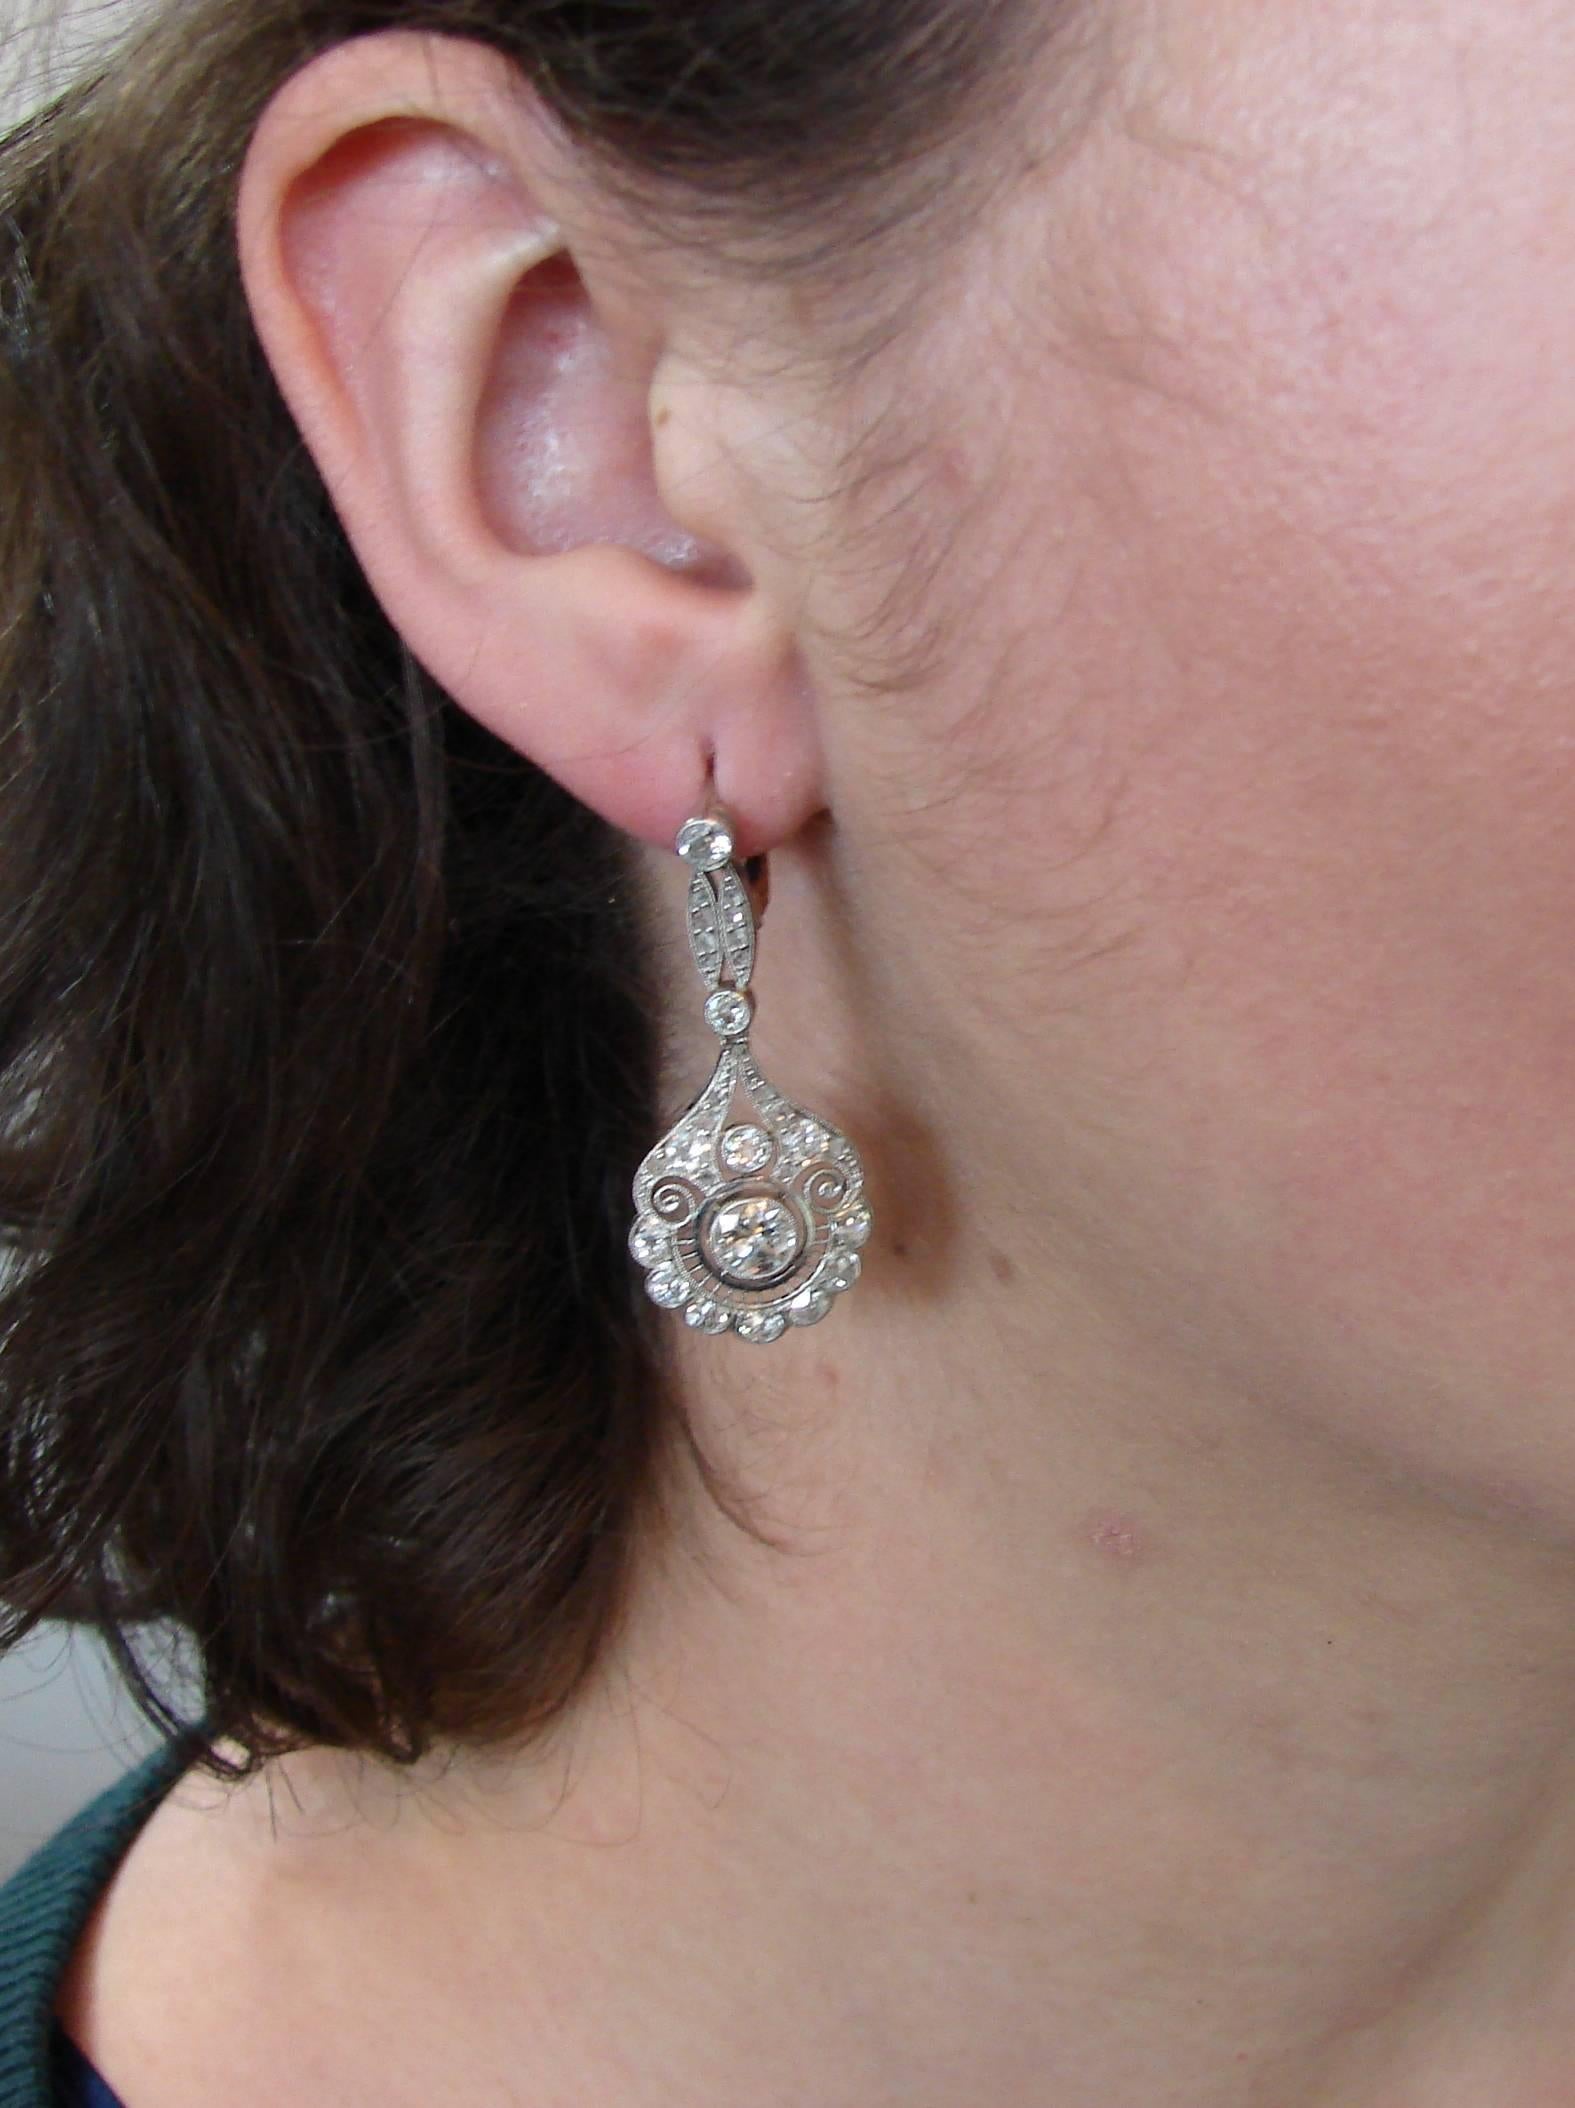 Fabulous Art Deco dangle earrings. Classy, timeless, feminine and wearable, they are a great addition to your jewelry collection. 
Feature two Old European cut diamonds approximately 0.65-carat each set in platinum, encrusted with Old European, mine